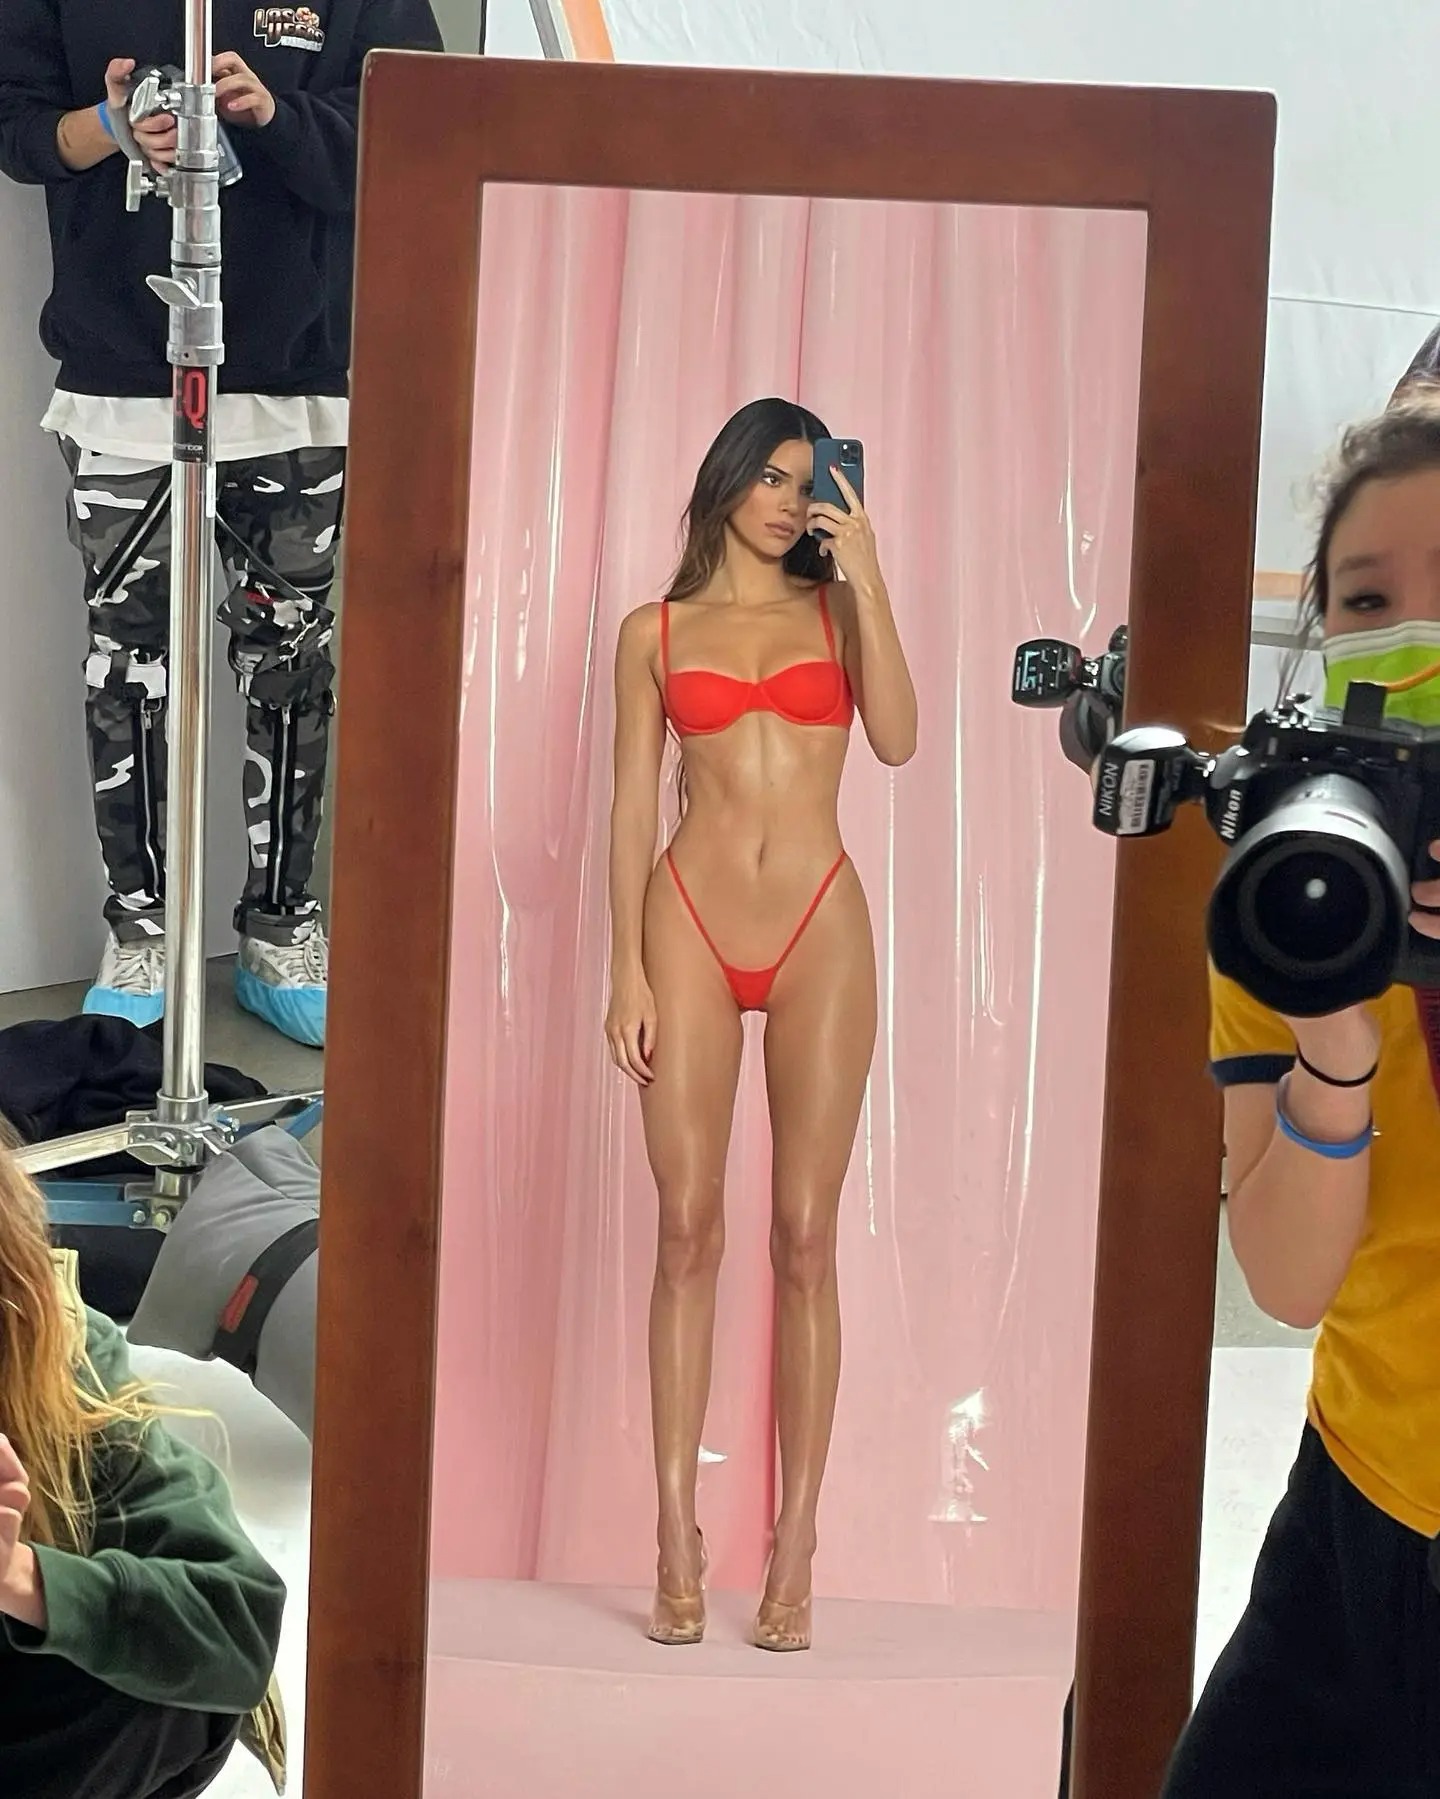 Celebrities Wearing Visible G-String: Photos of the Trend